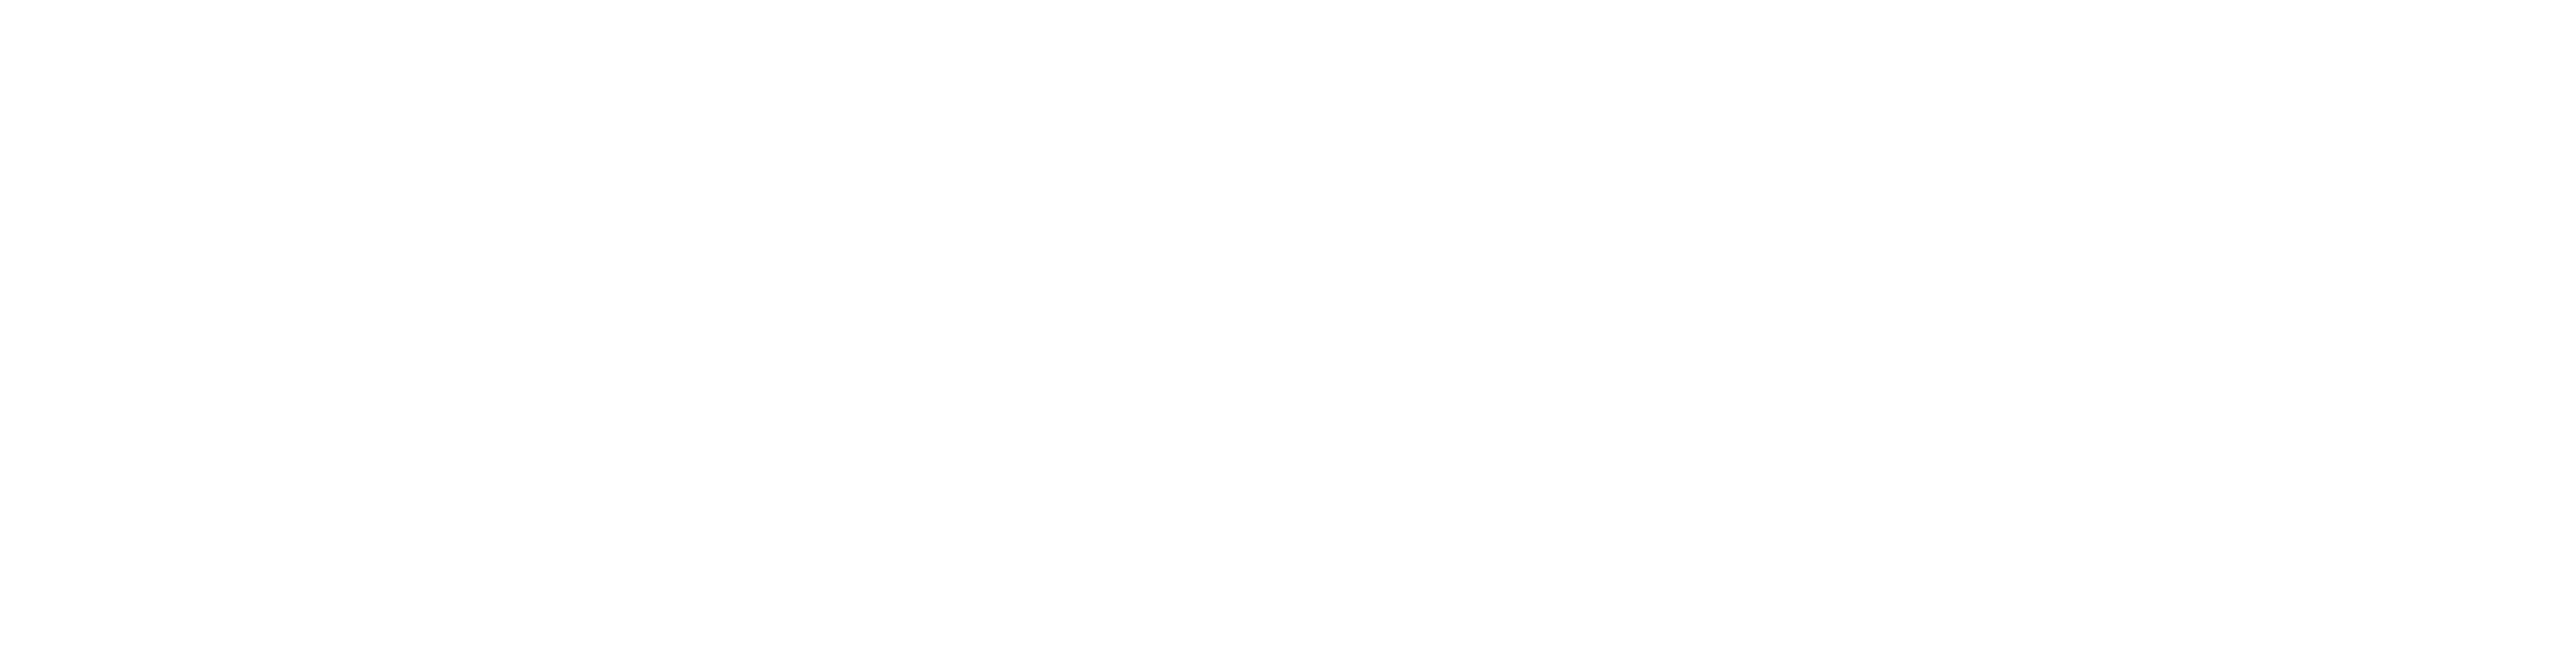 Drug and Alcohol Recovery Services South West Prisons white logo